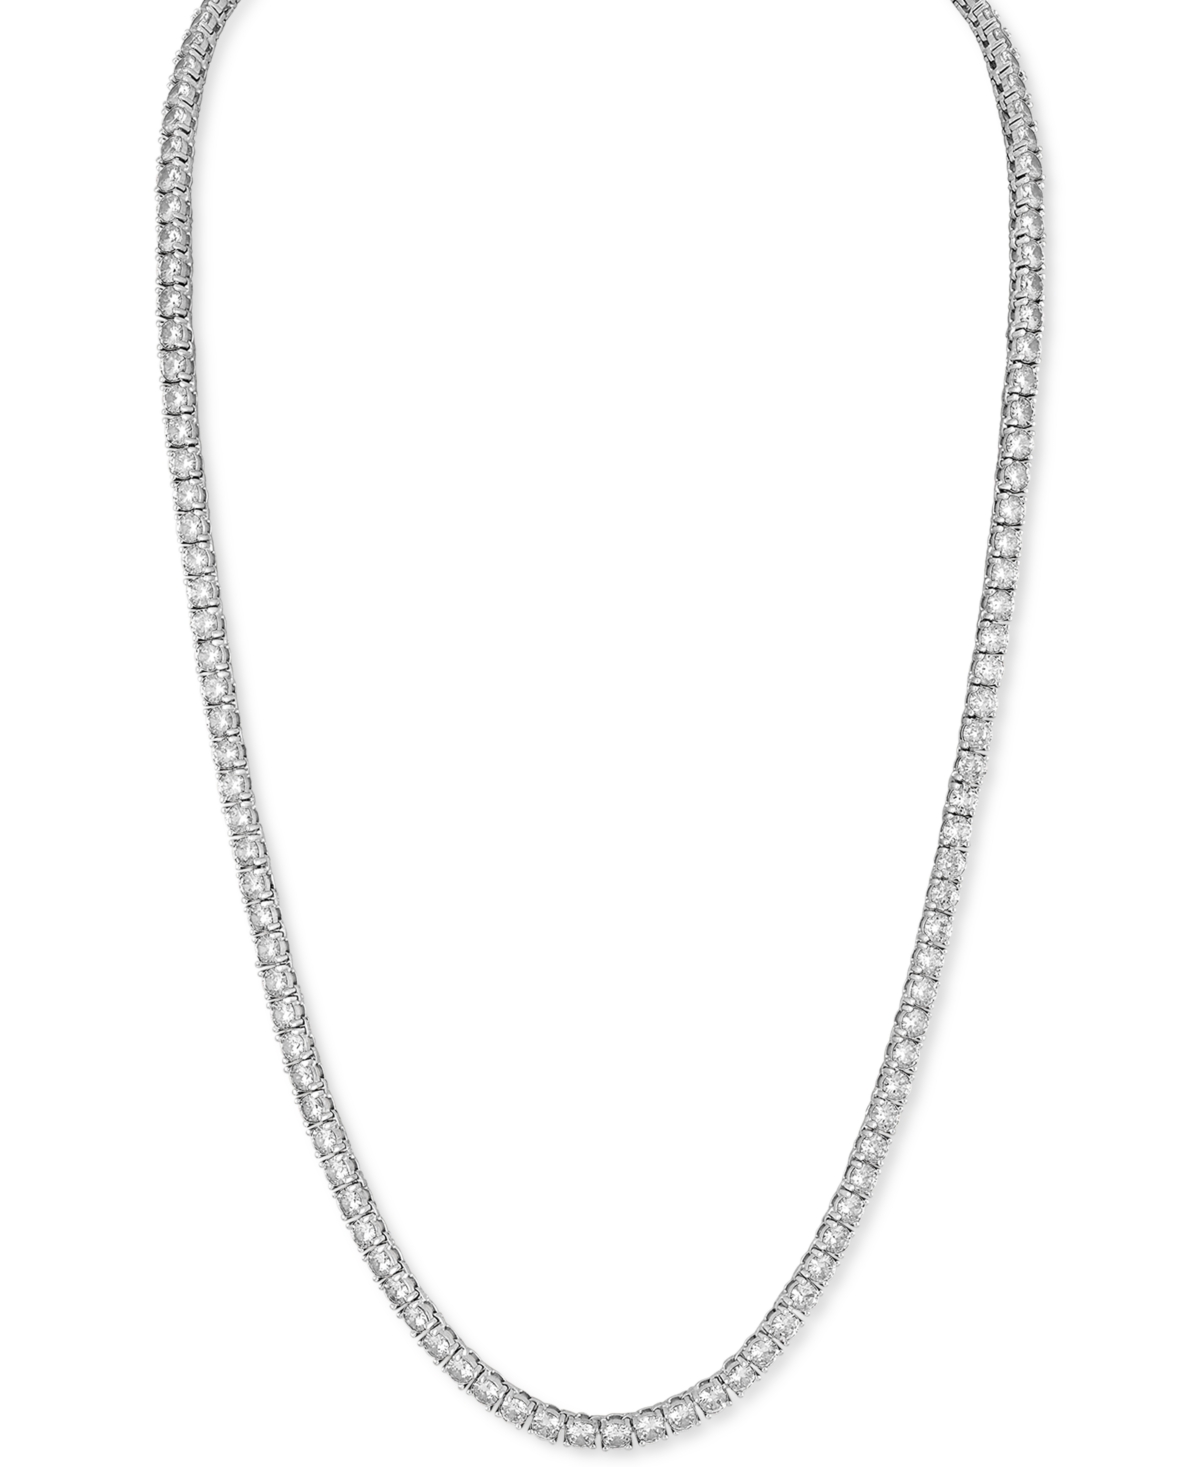 Esquire Men's Jewelry Cubic Zirconia (4mm) Tennis Necklace 22" (Also in Black Spinel), Created for Macy's